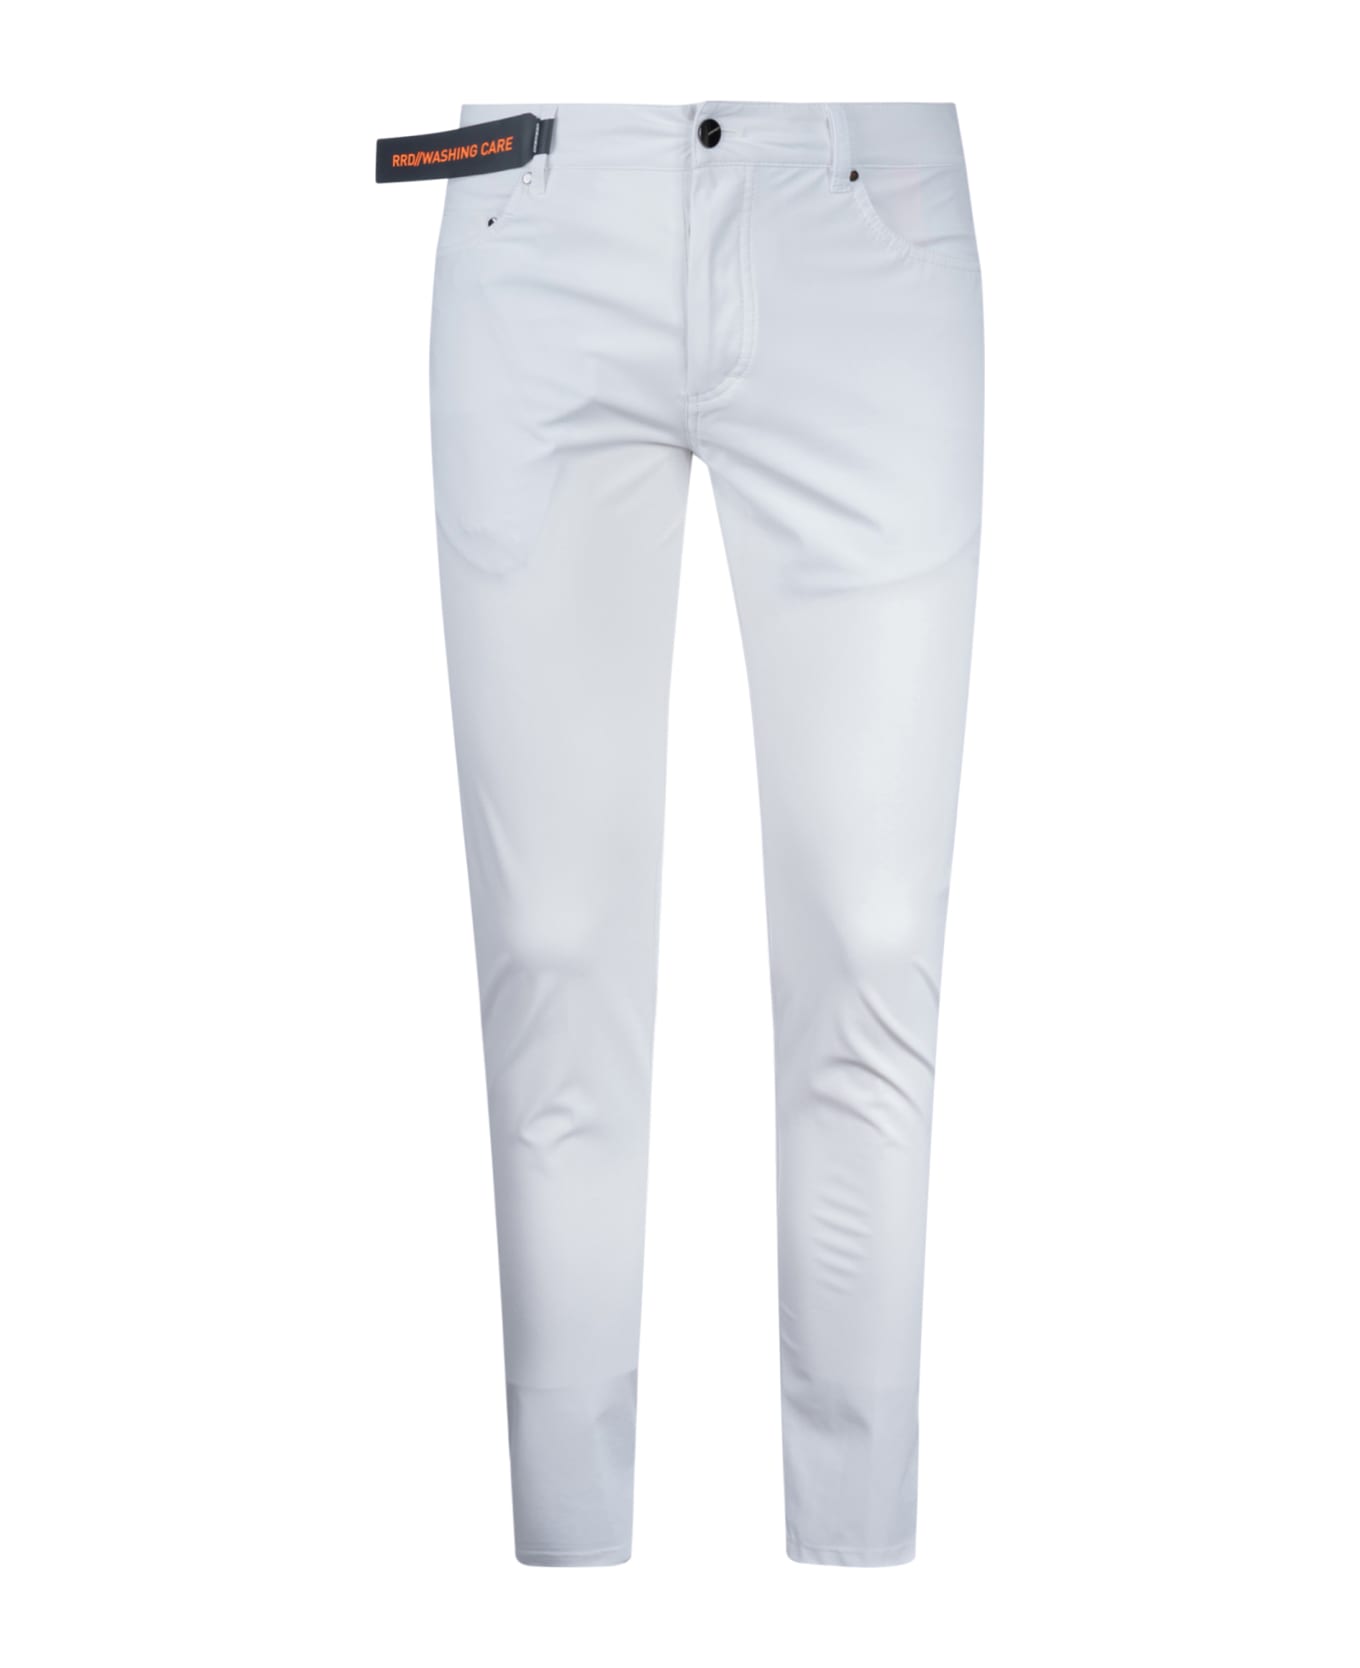 RRD - Roberto Ricci Design Skinny Fitted Jeans - White